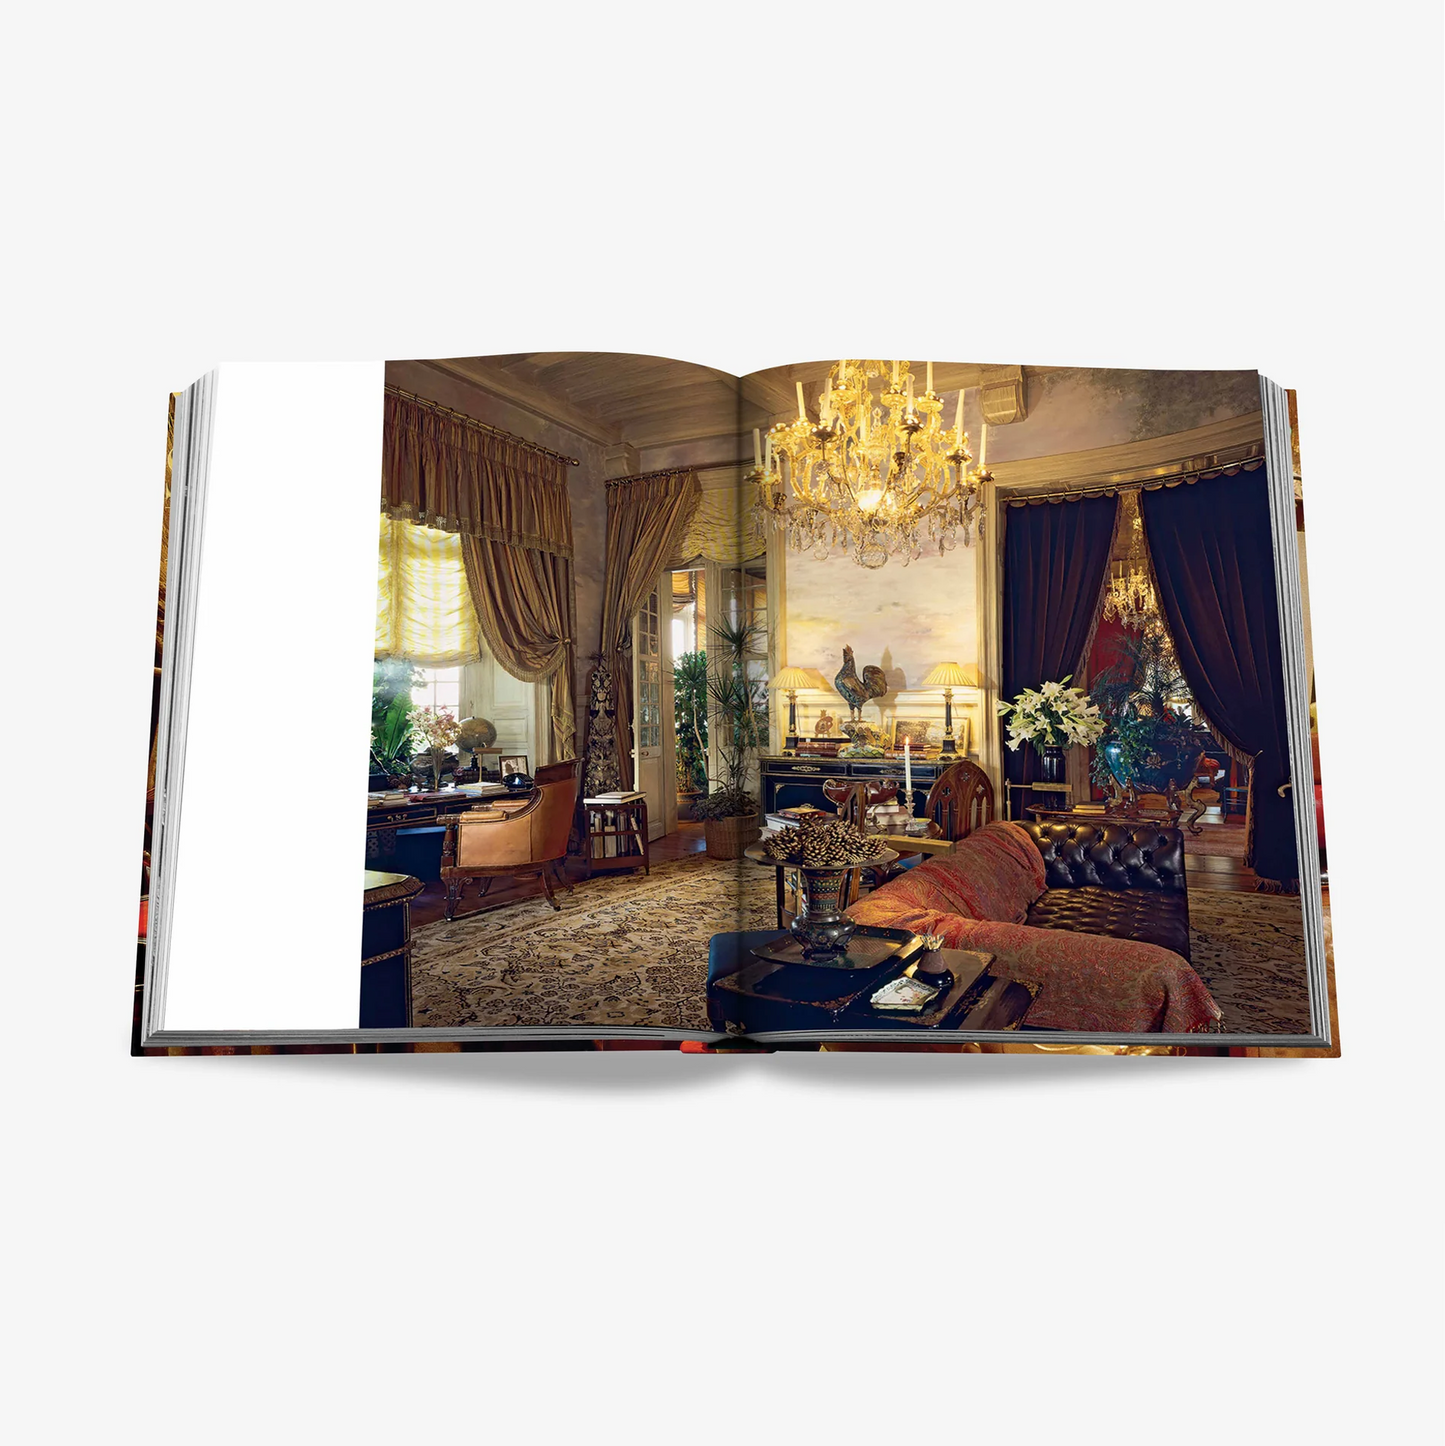 "Yves Saint Laurent at Home" Book